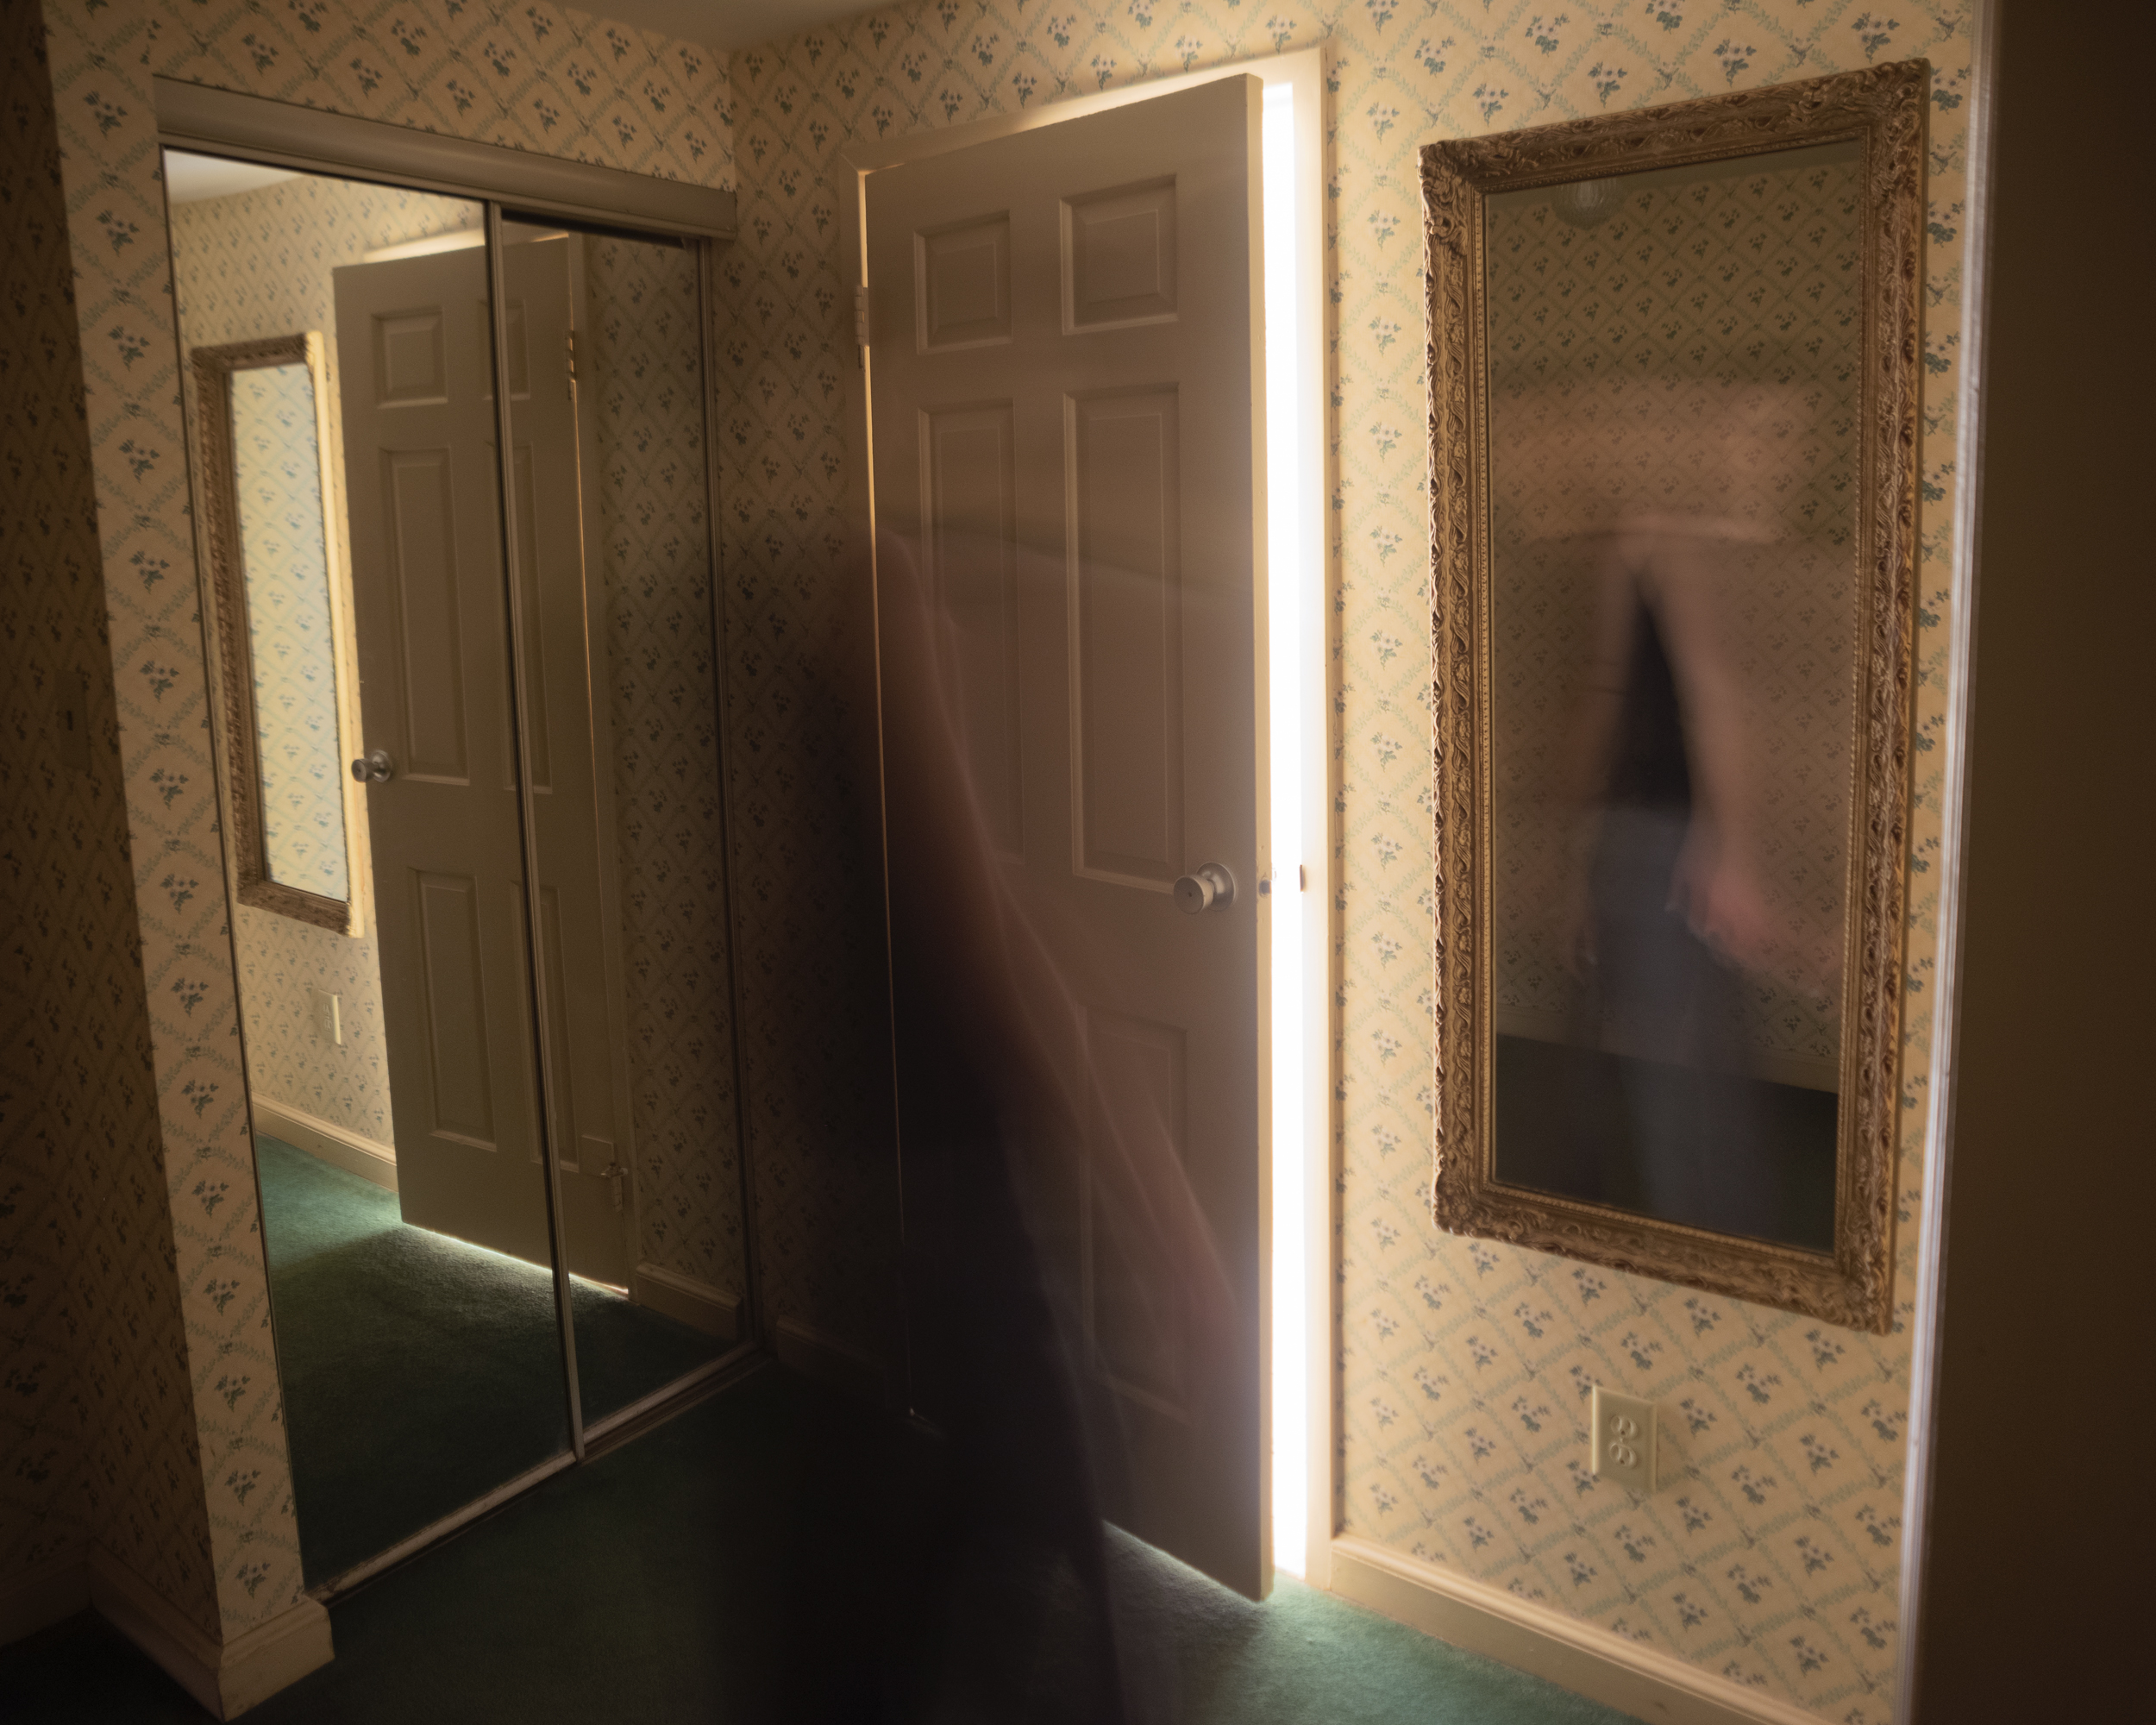 GHOST IN THE MIRROR REPROCESS2.jpg